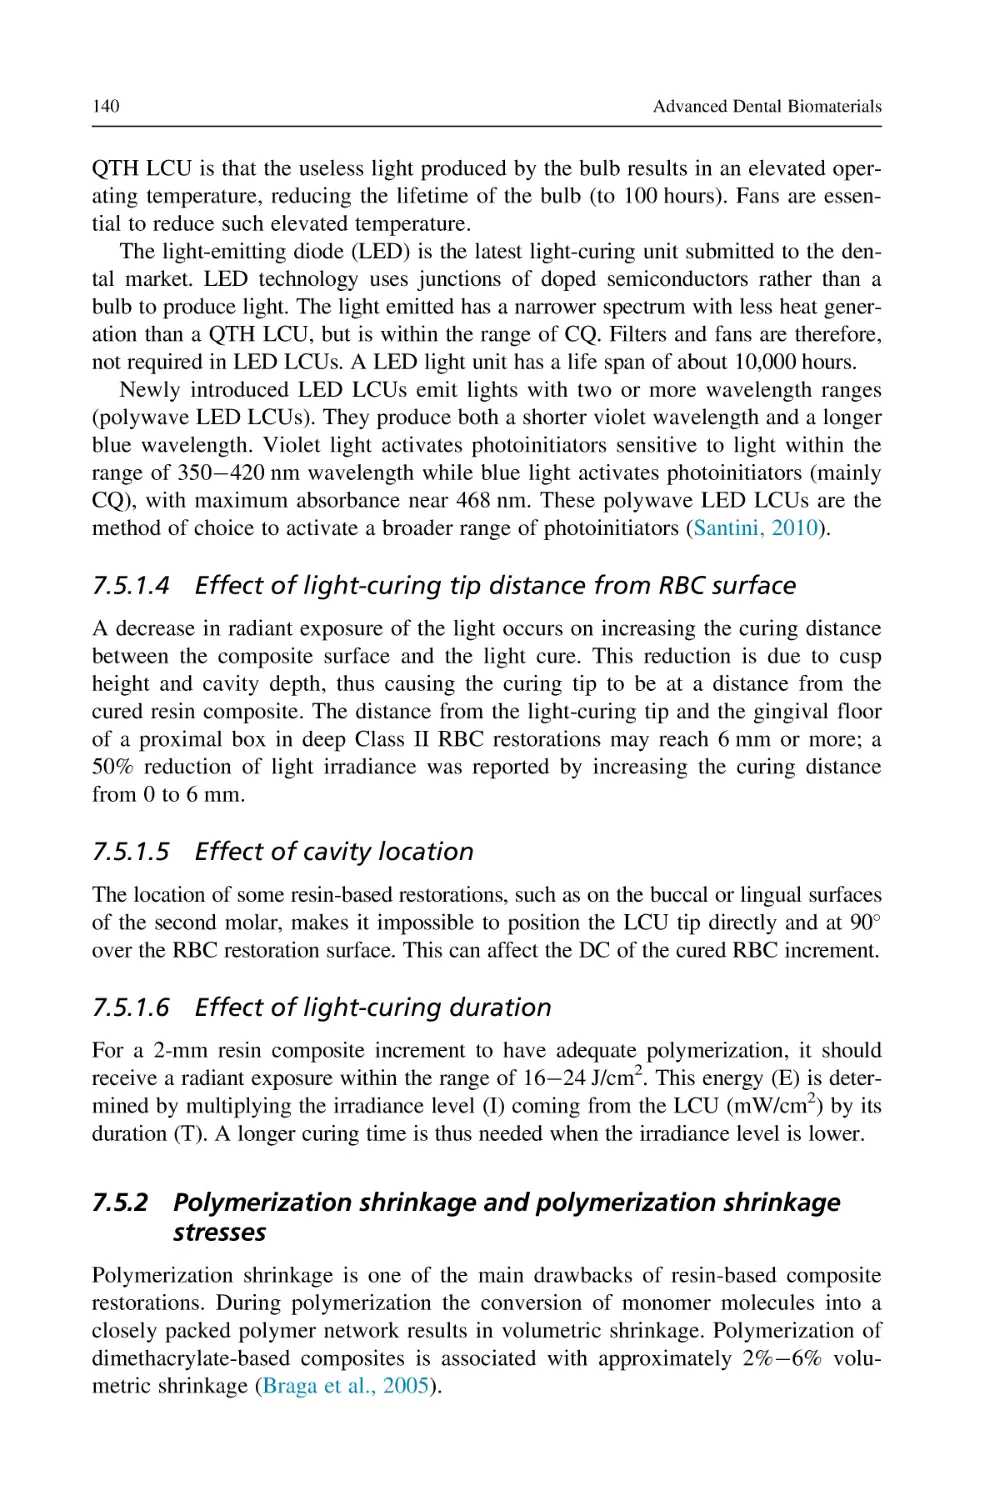 7.5.1.4 Effect of light-curing tip distance from RBC surface
7.5.1.5 Effect of cavity location
7.5.1.6 Effect of light-curing duration
7.5.2 Polymerization shrinkage and polymerization shrinkage stresses